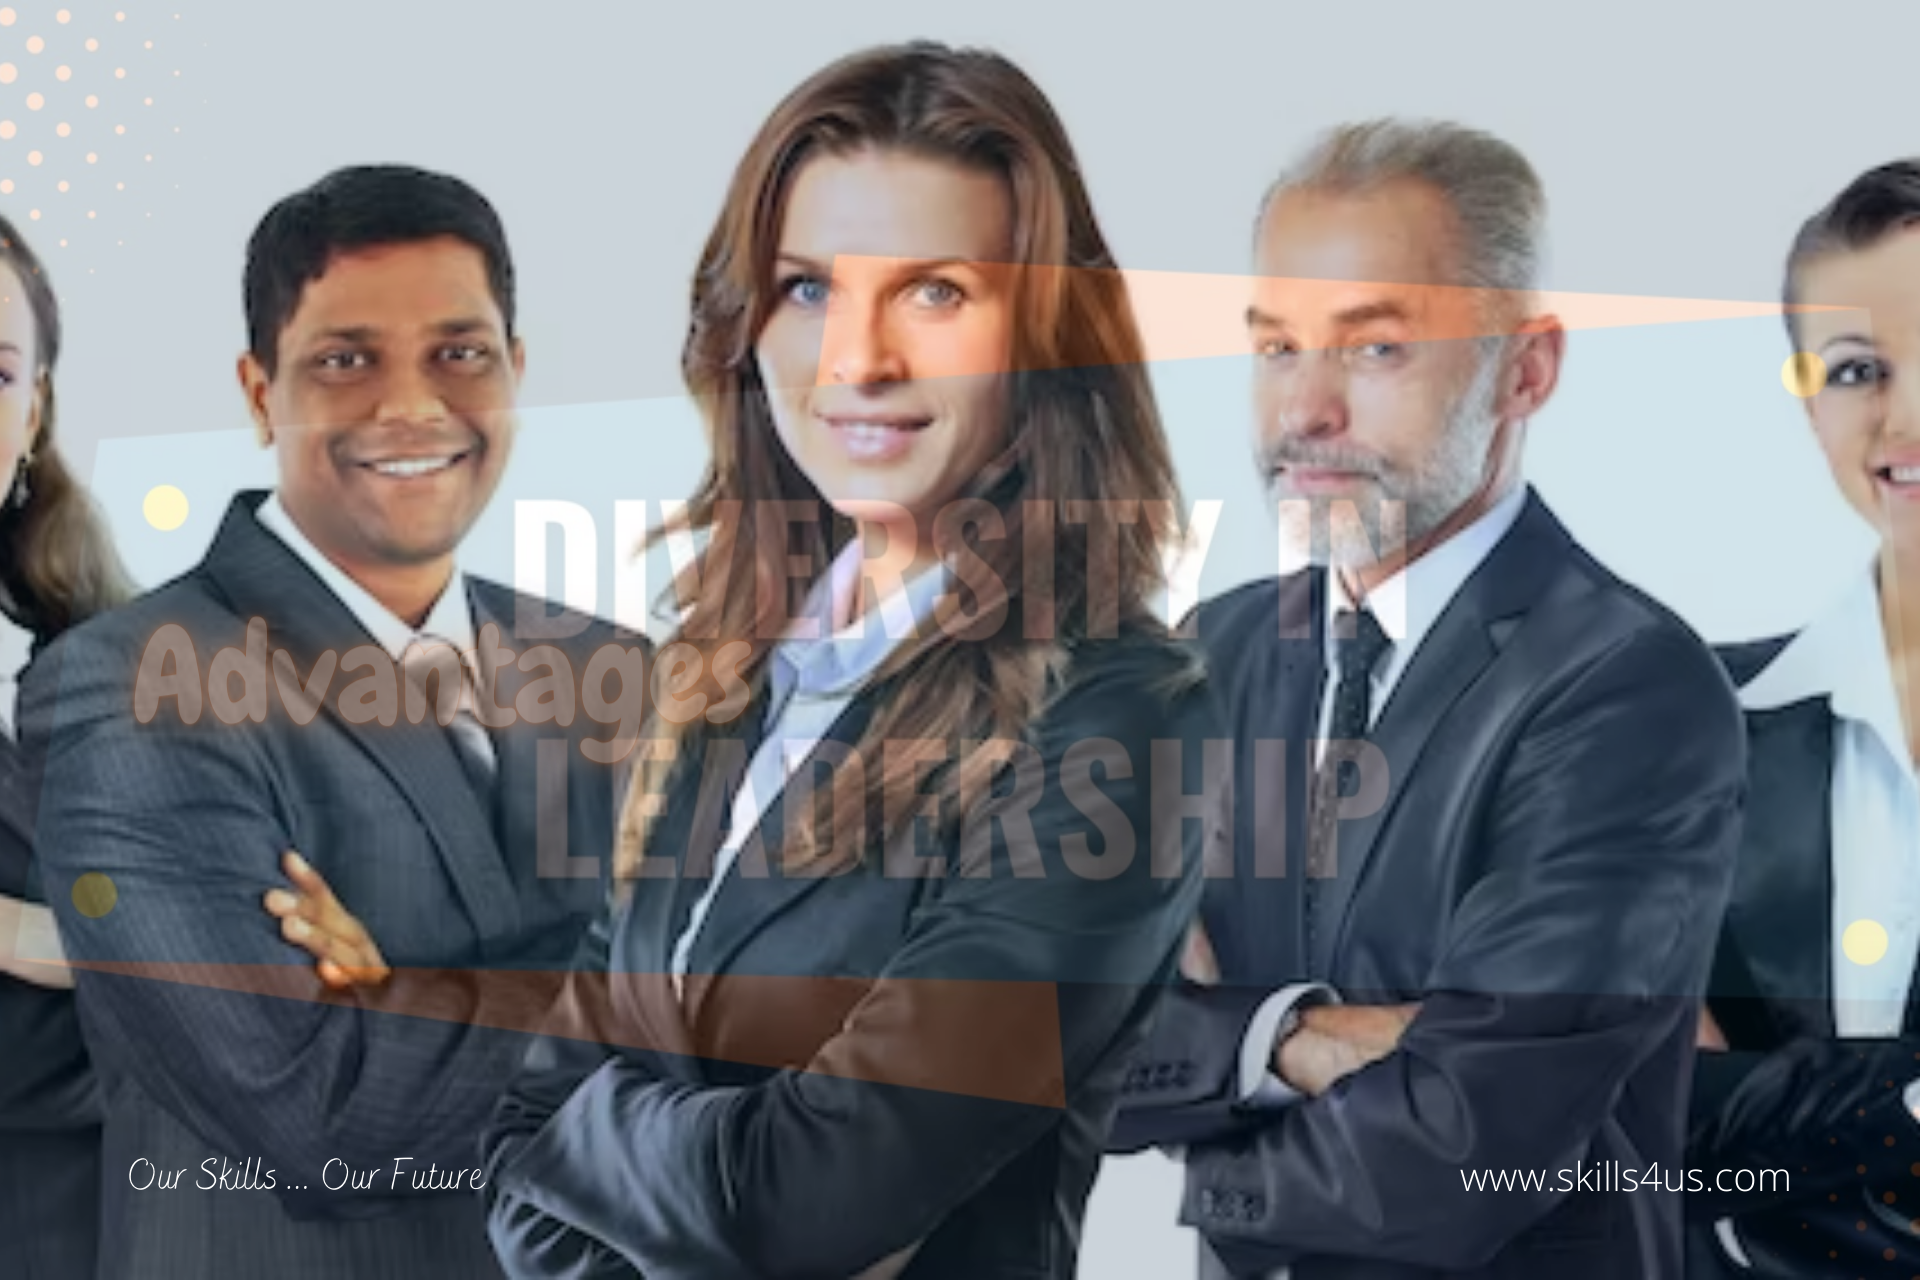 Advantages Of Diversity In Leadership Enhance The Business Organizations' Success